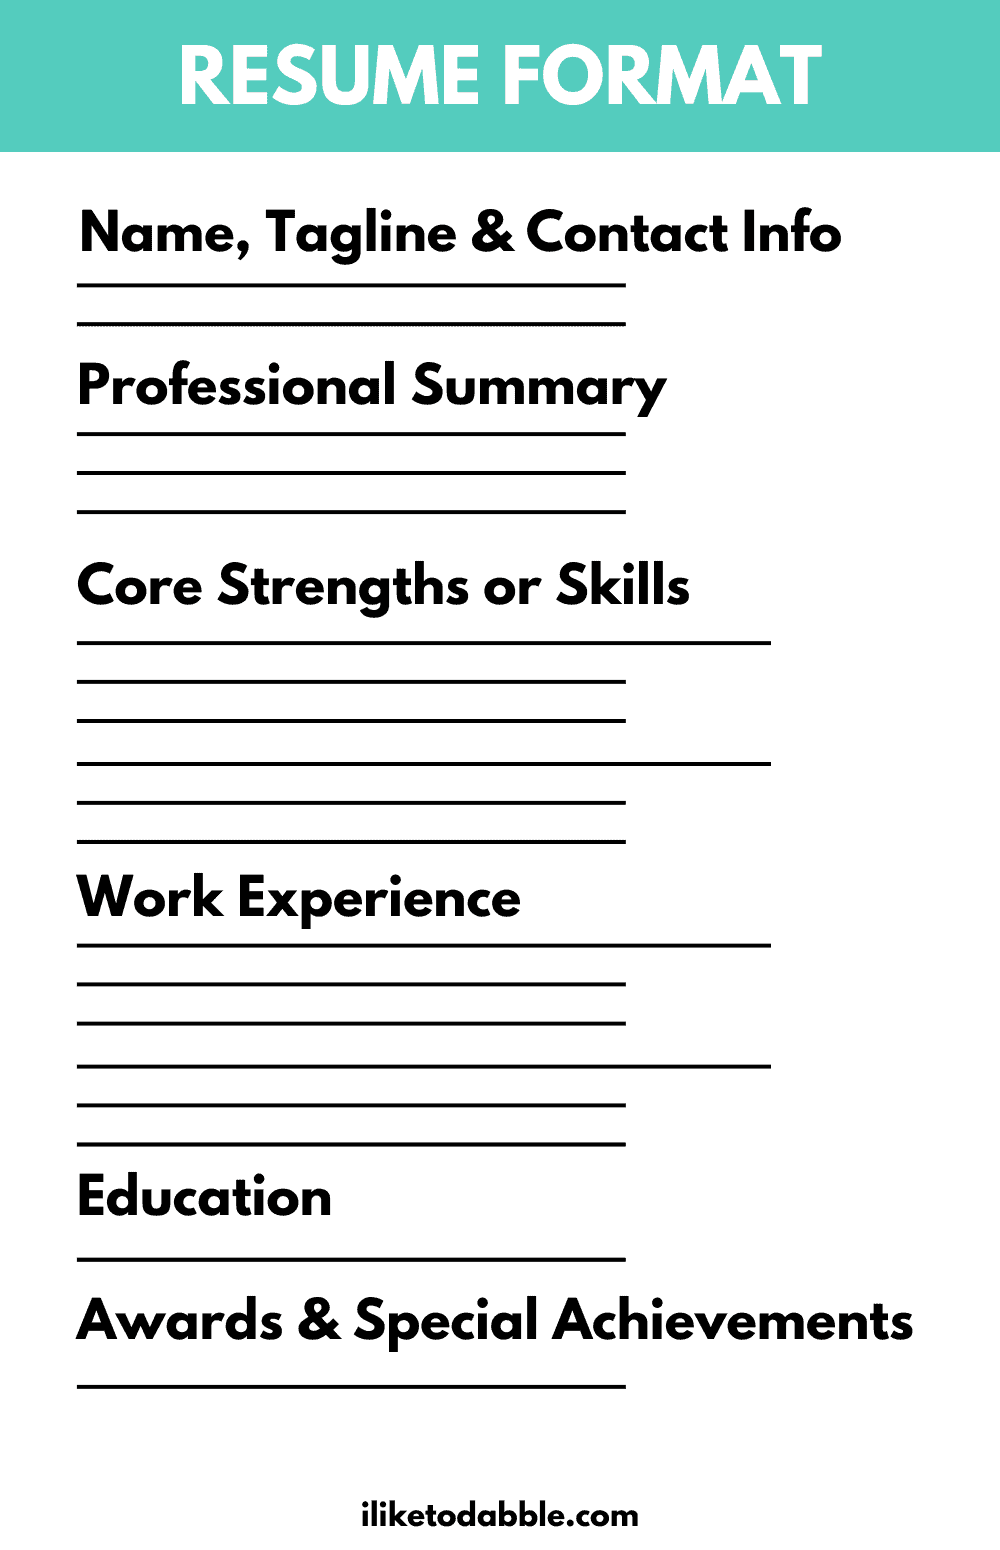 resume template format